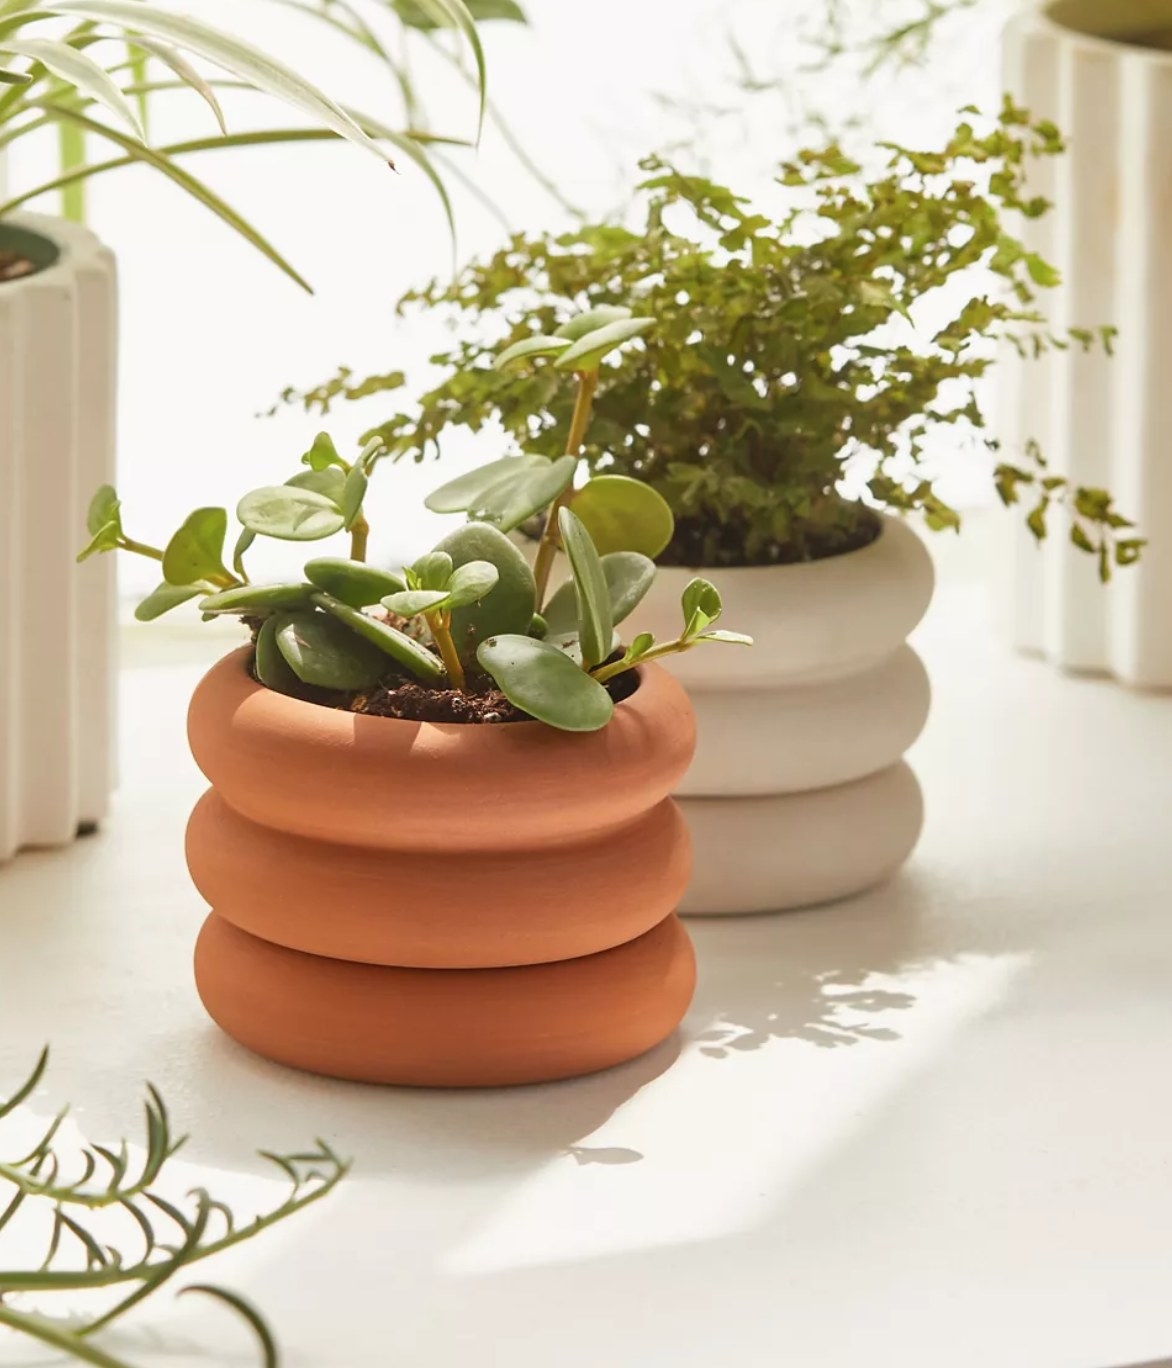 two of the stacking planters in orange and cream colors with succulents in them